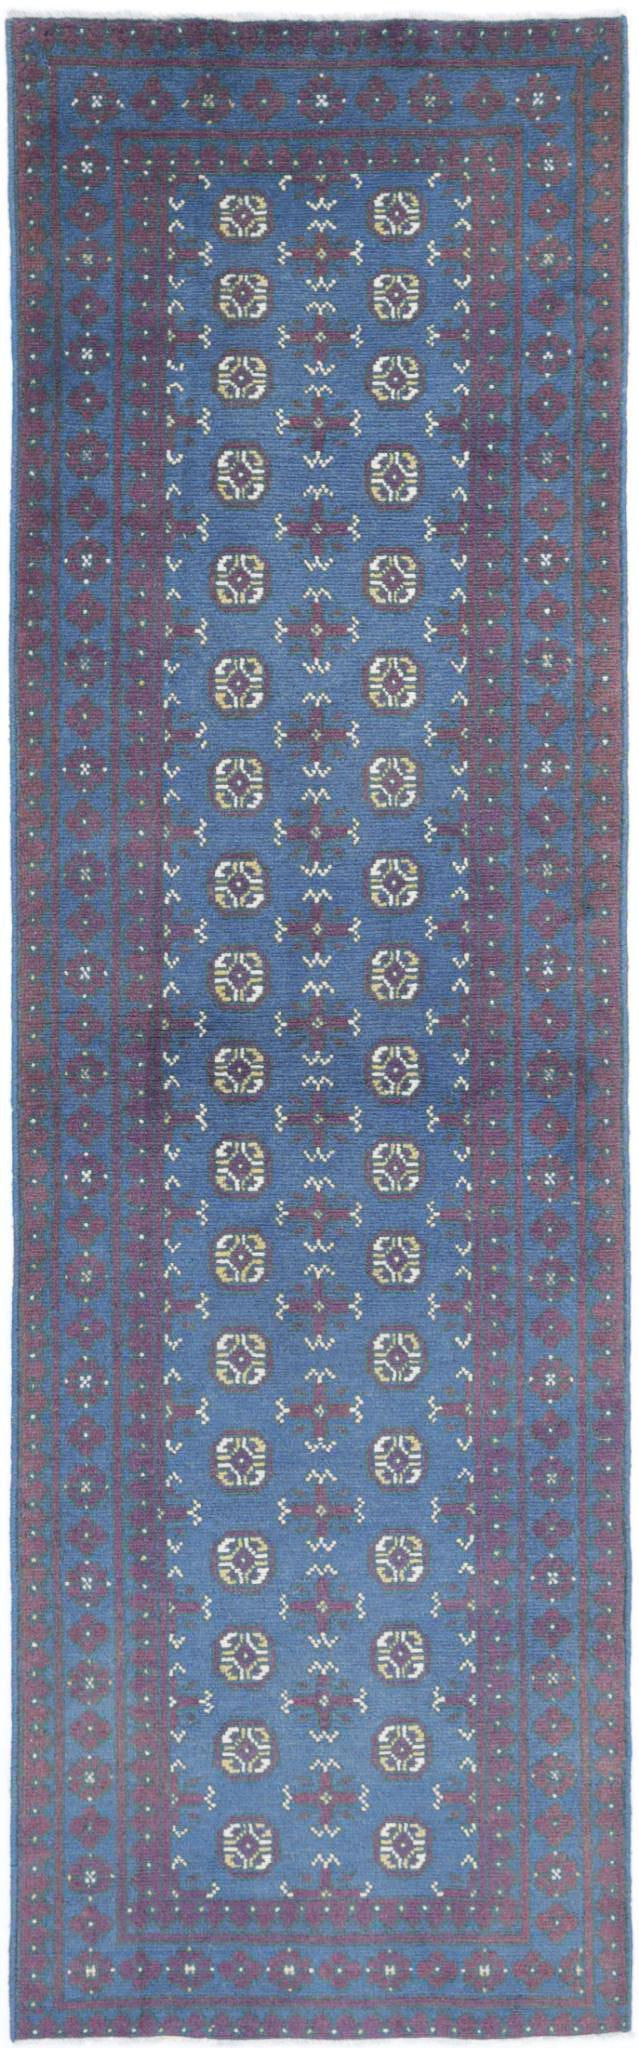 Revival-hand-knotted-gul-collection-wool-rug-5013997.jpg